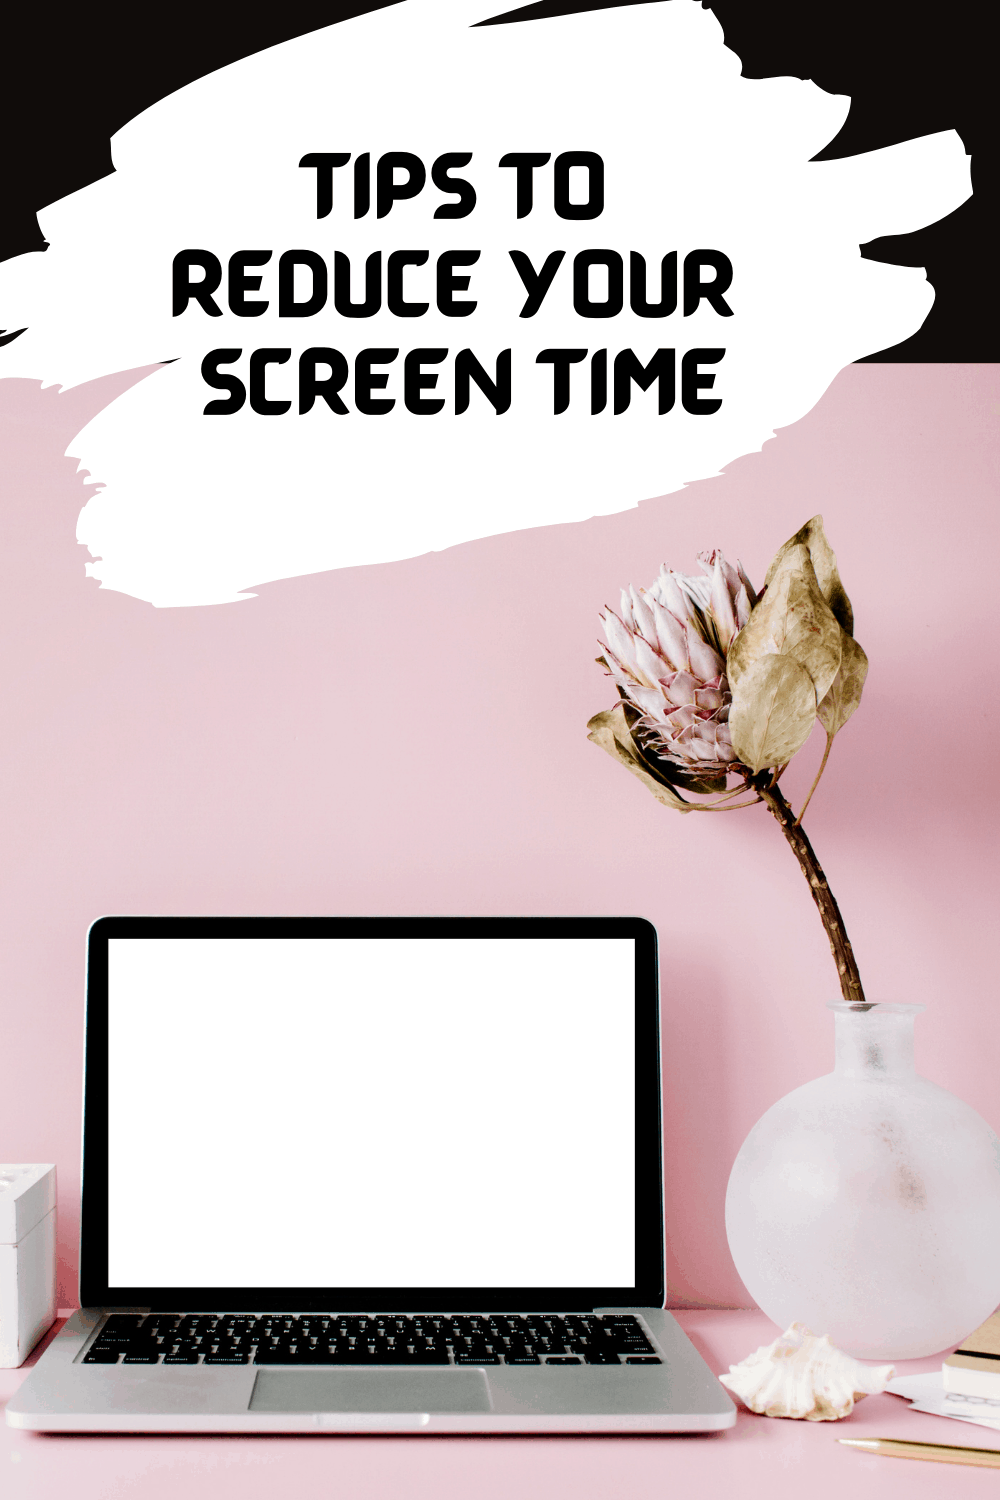 Tips to reduce screen time and improve wellbeing 